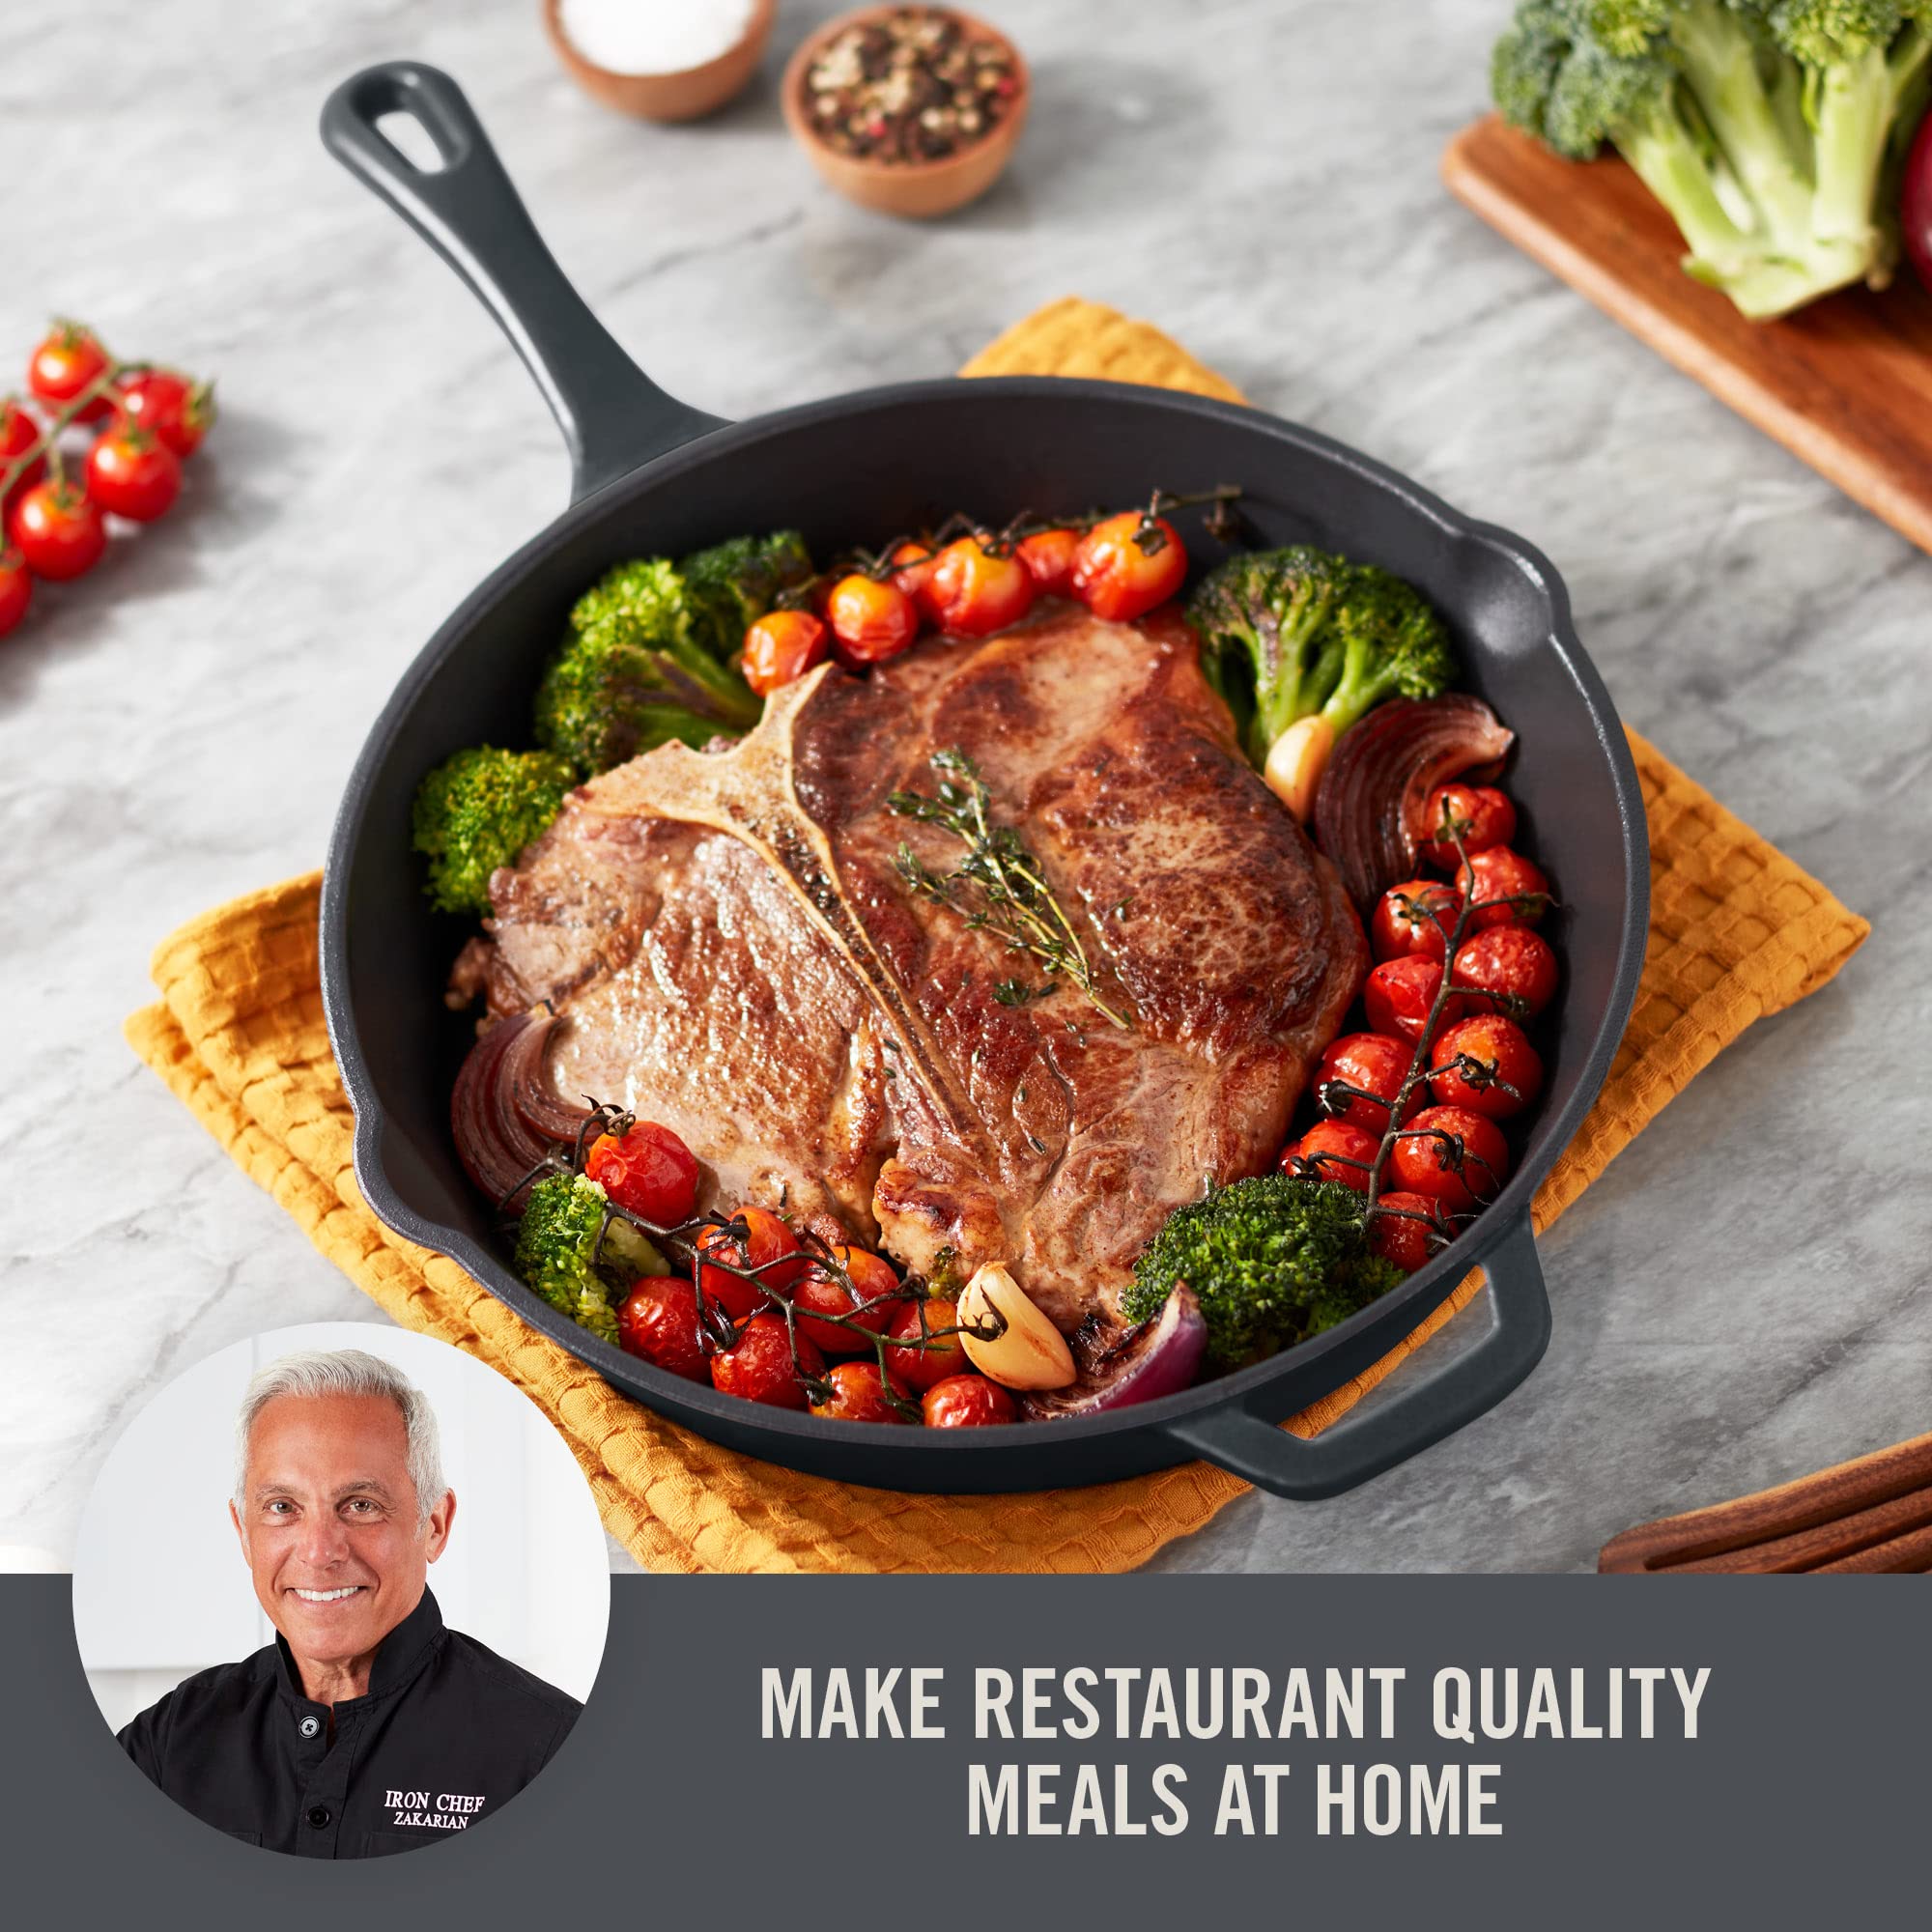 DASH Zakarian 11" Nonstick Cast Iron Skillet with Pour Spouts for Searing, Baking, Grilling, Roasting and More - Black